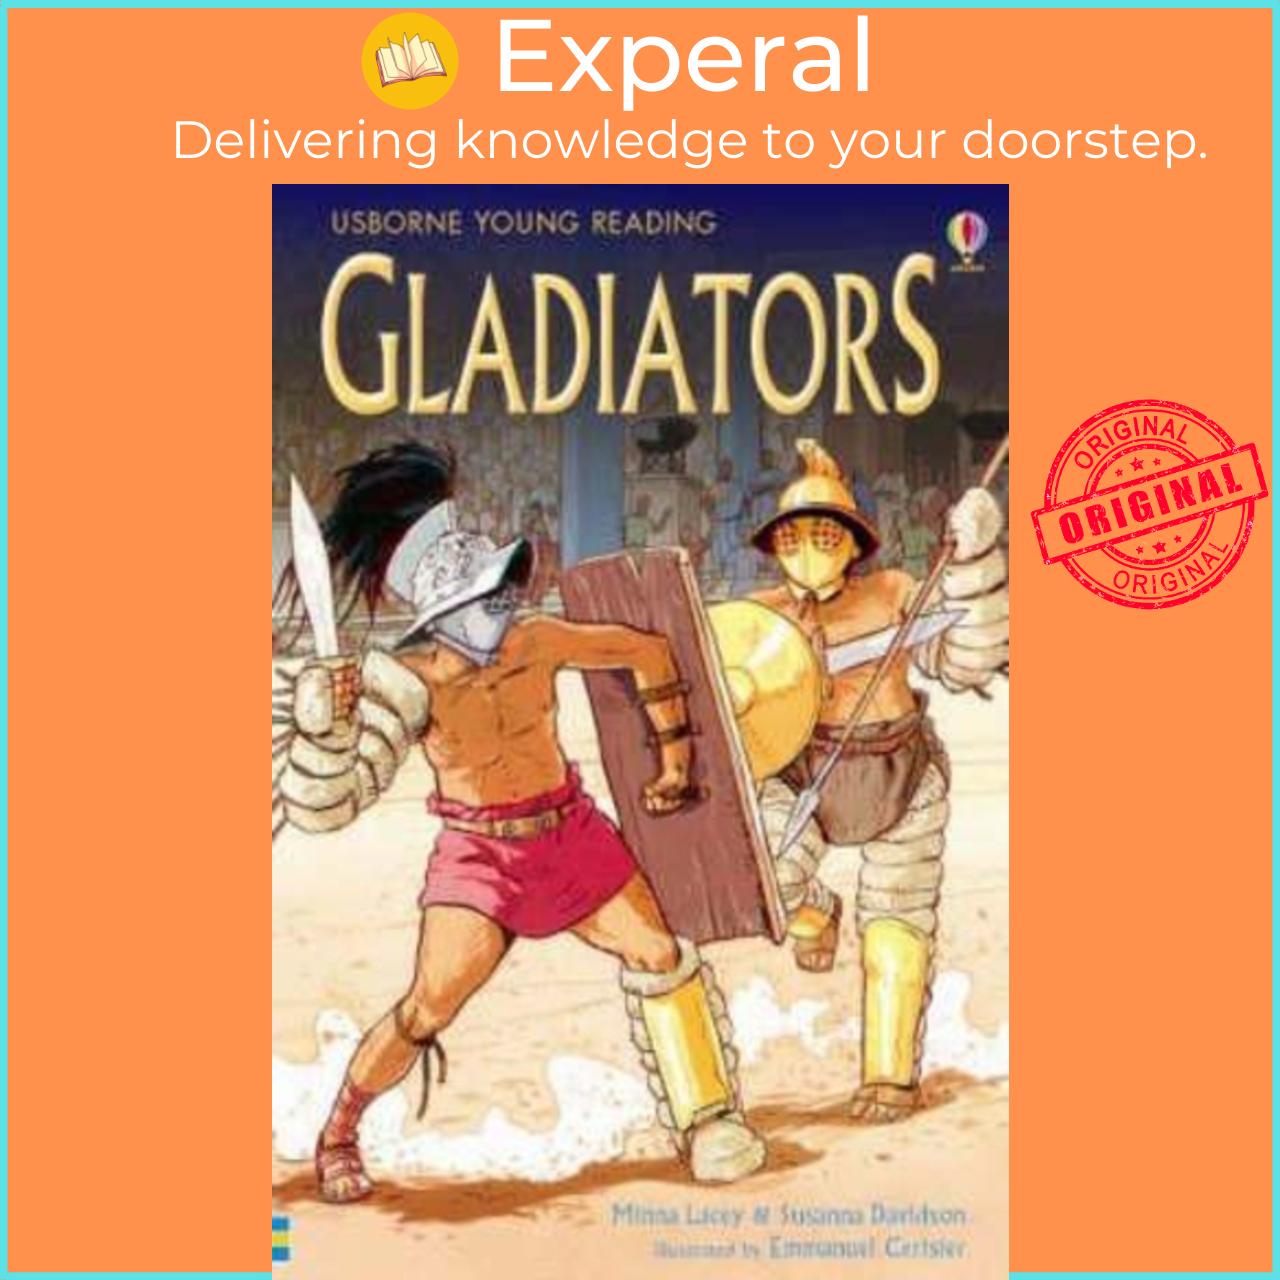 Sách - Gladiator by Minna Lacey (UK edition, hardcover)